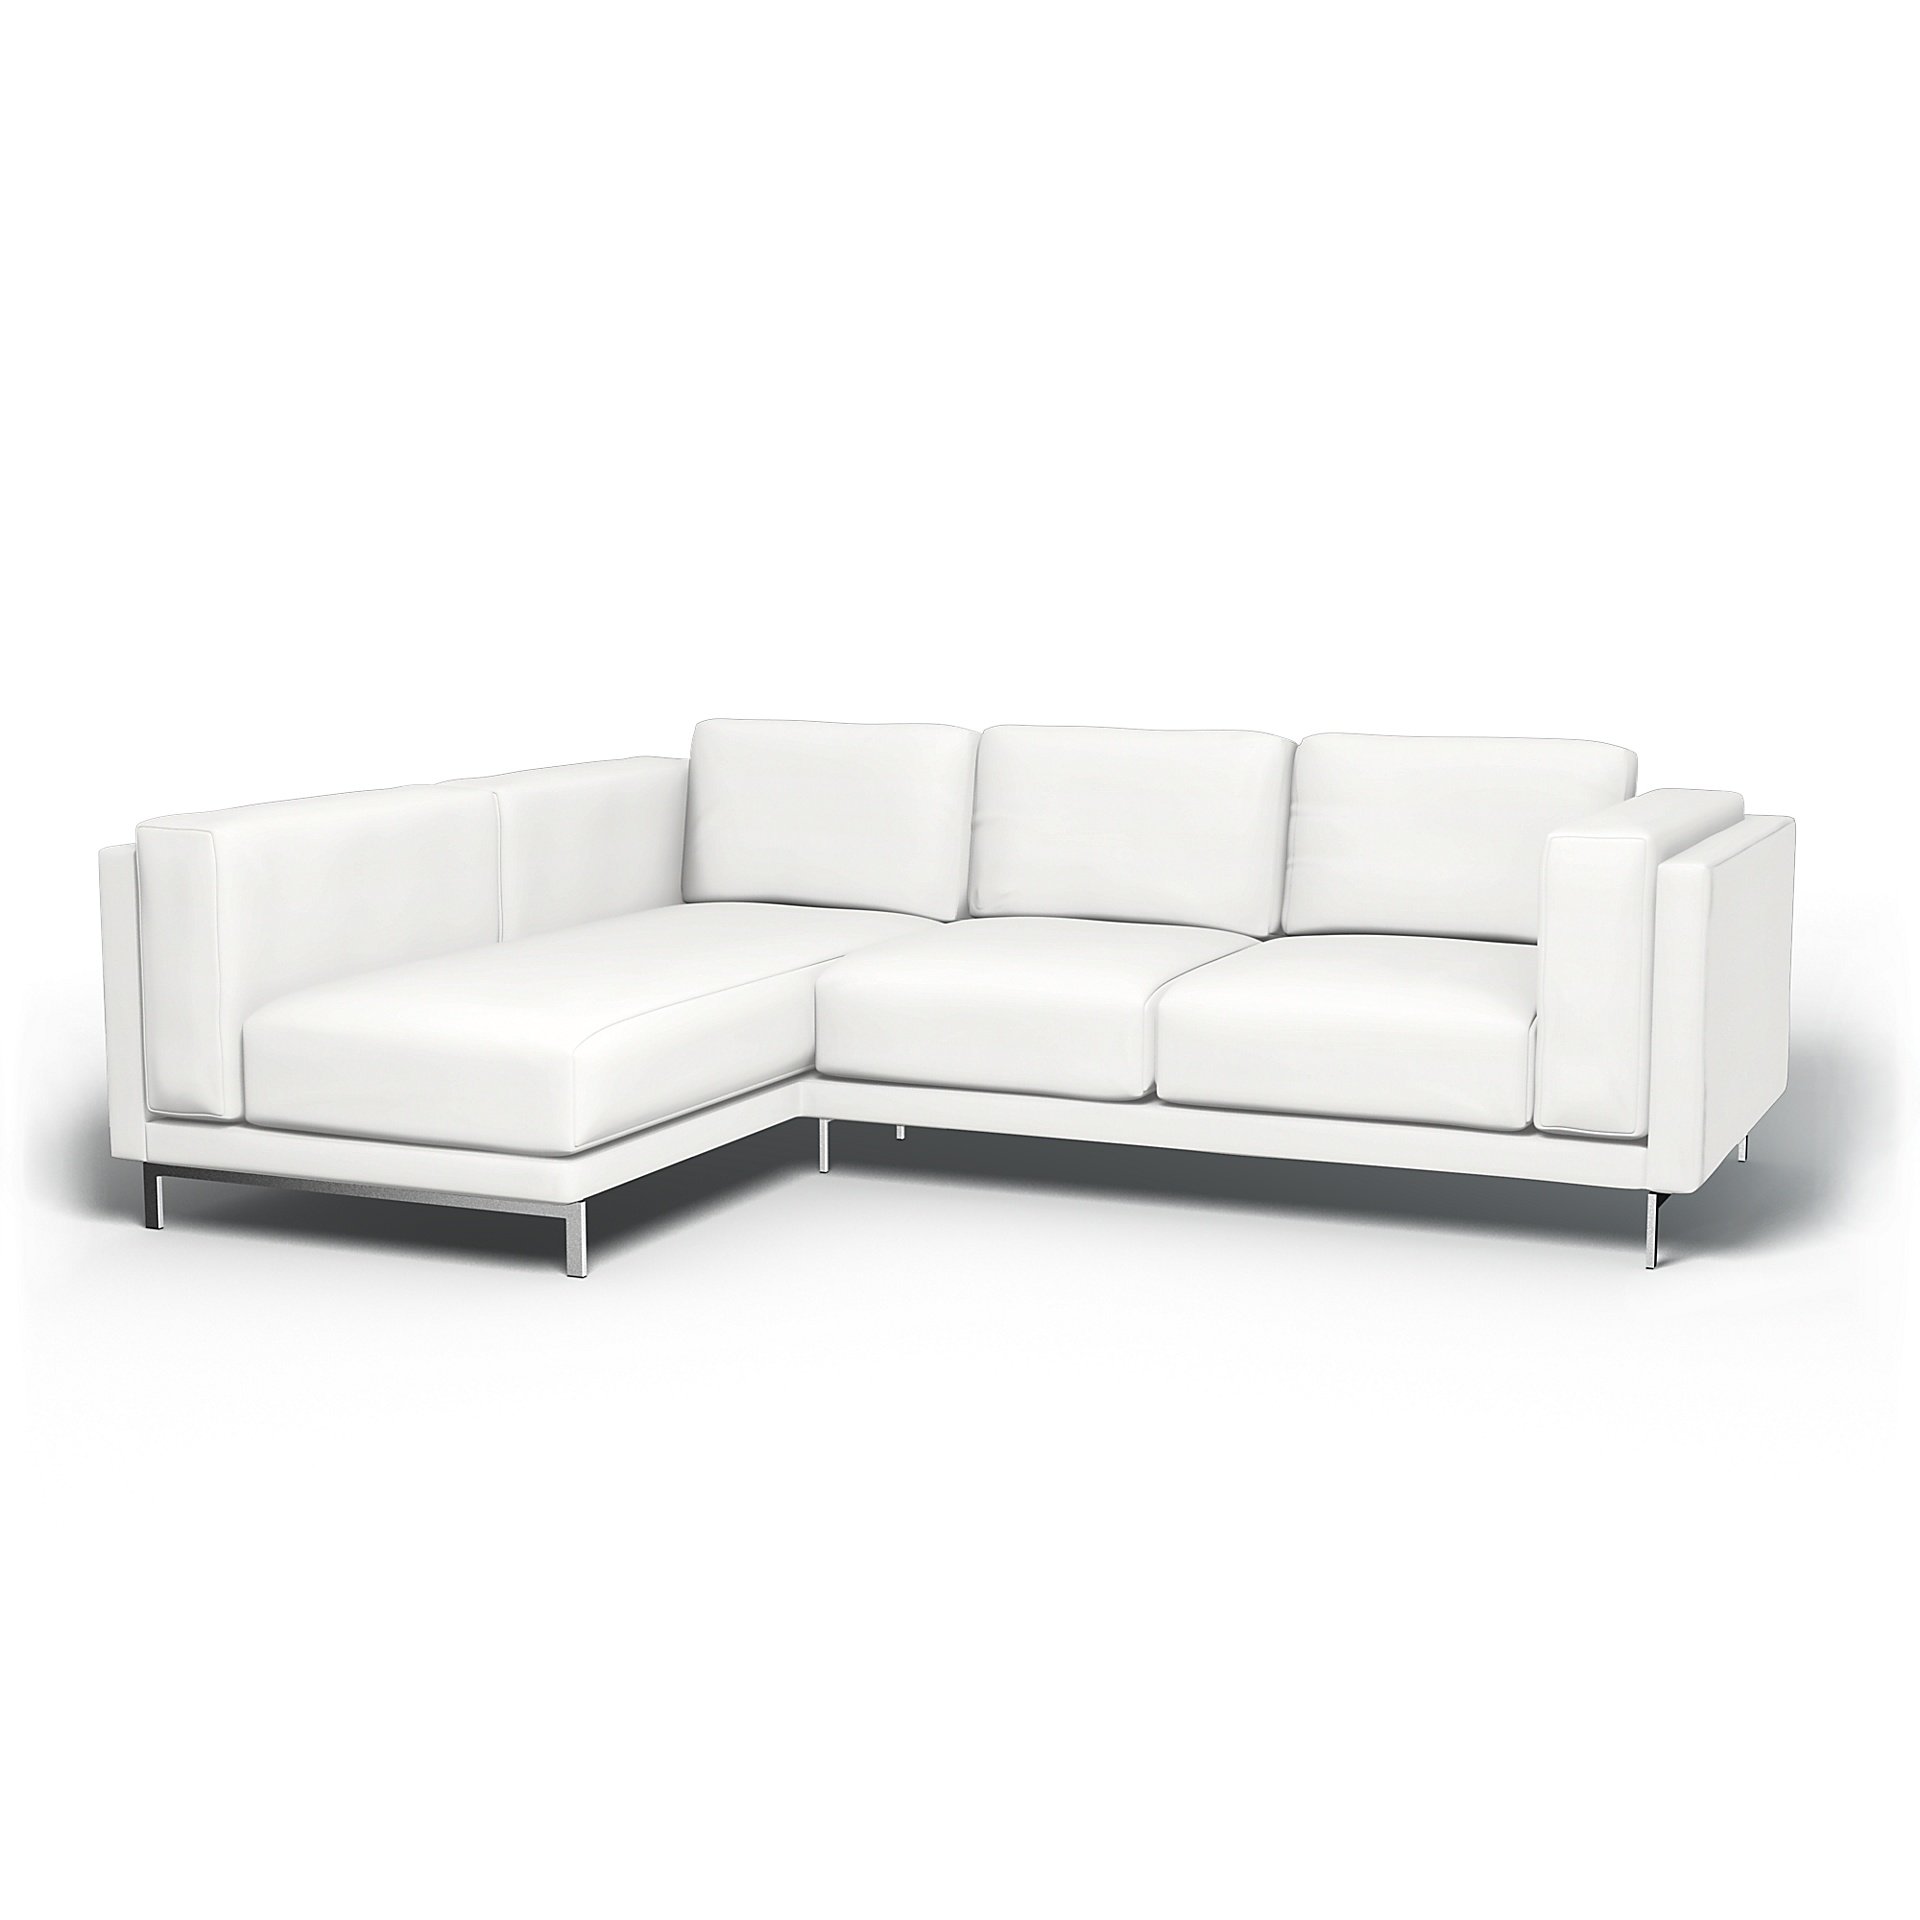 IKEA - Nockeby 3 Seater Sofa with Left Chaise Cover, Absolute White, Linen - Bemz